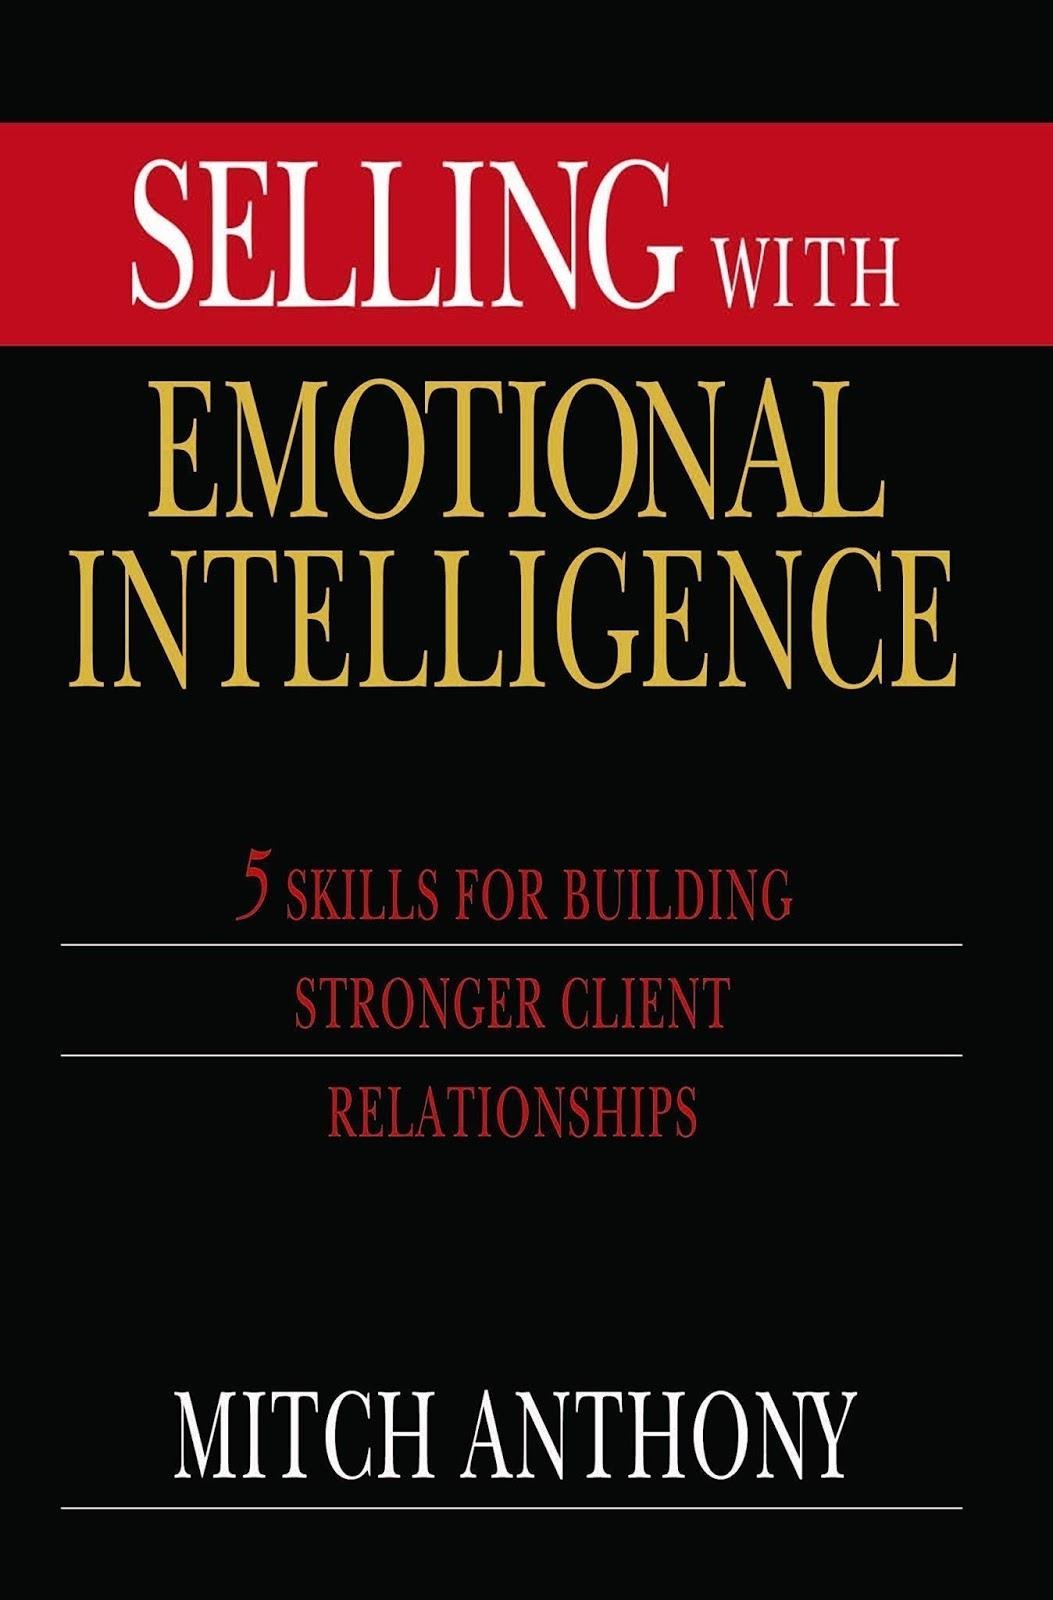 Libro 'Selling with Emotional Intelligence'